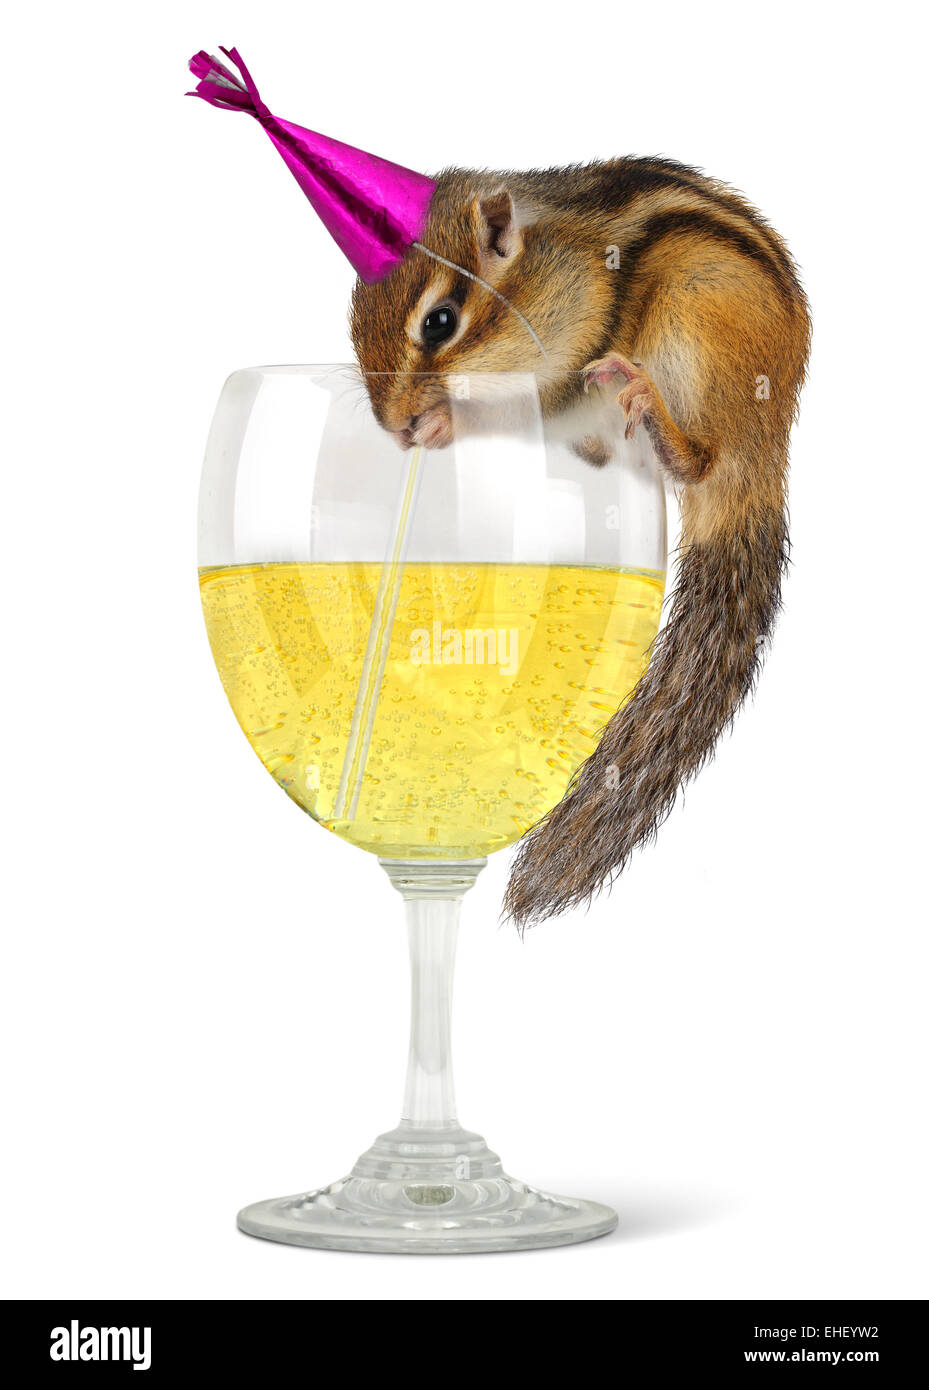 Funny chipmunk drinking champagne, celebrate concept. Stock Photo